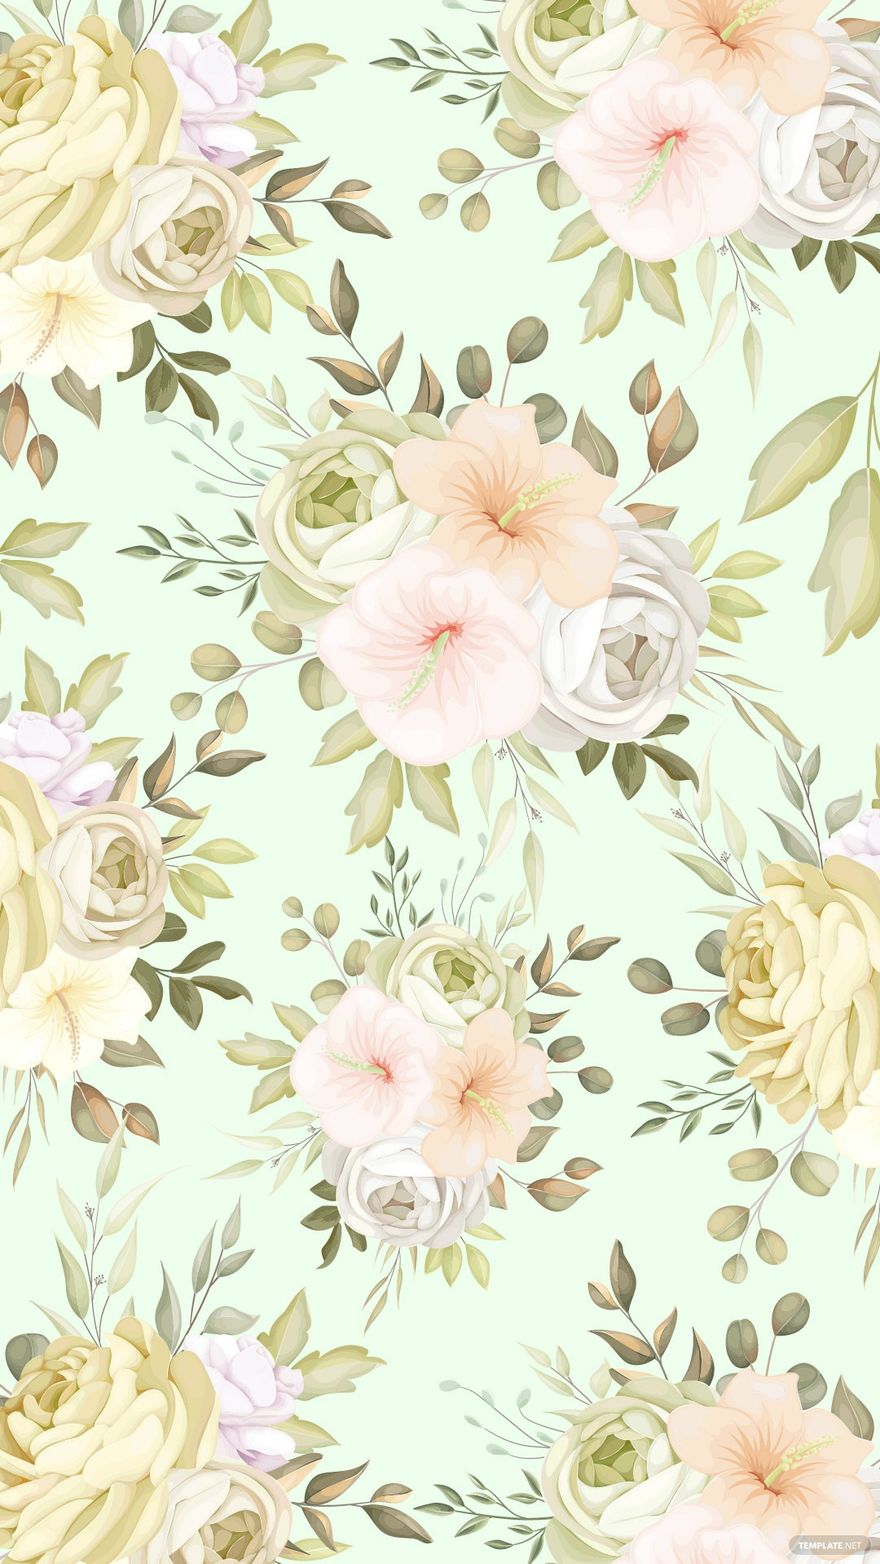 Free Fall Floral Watercolor Background